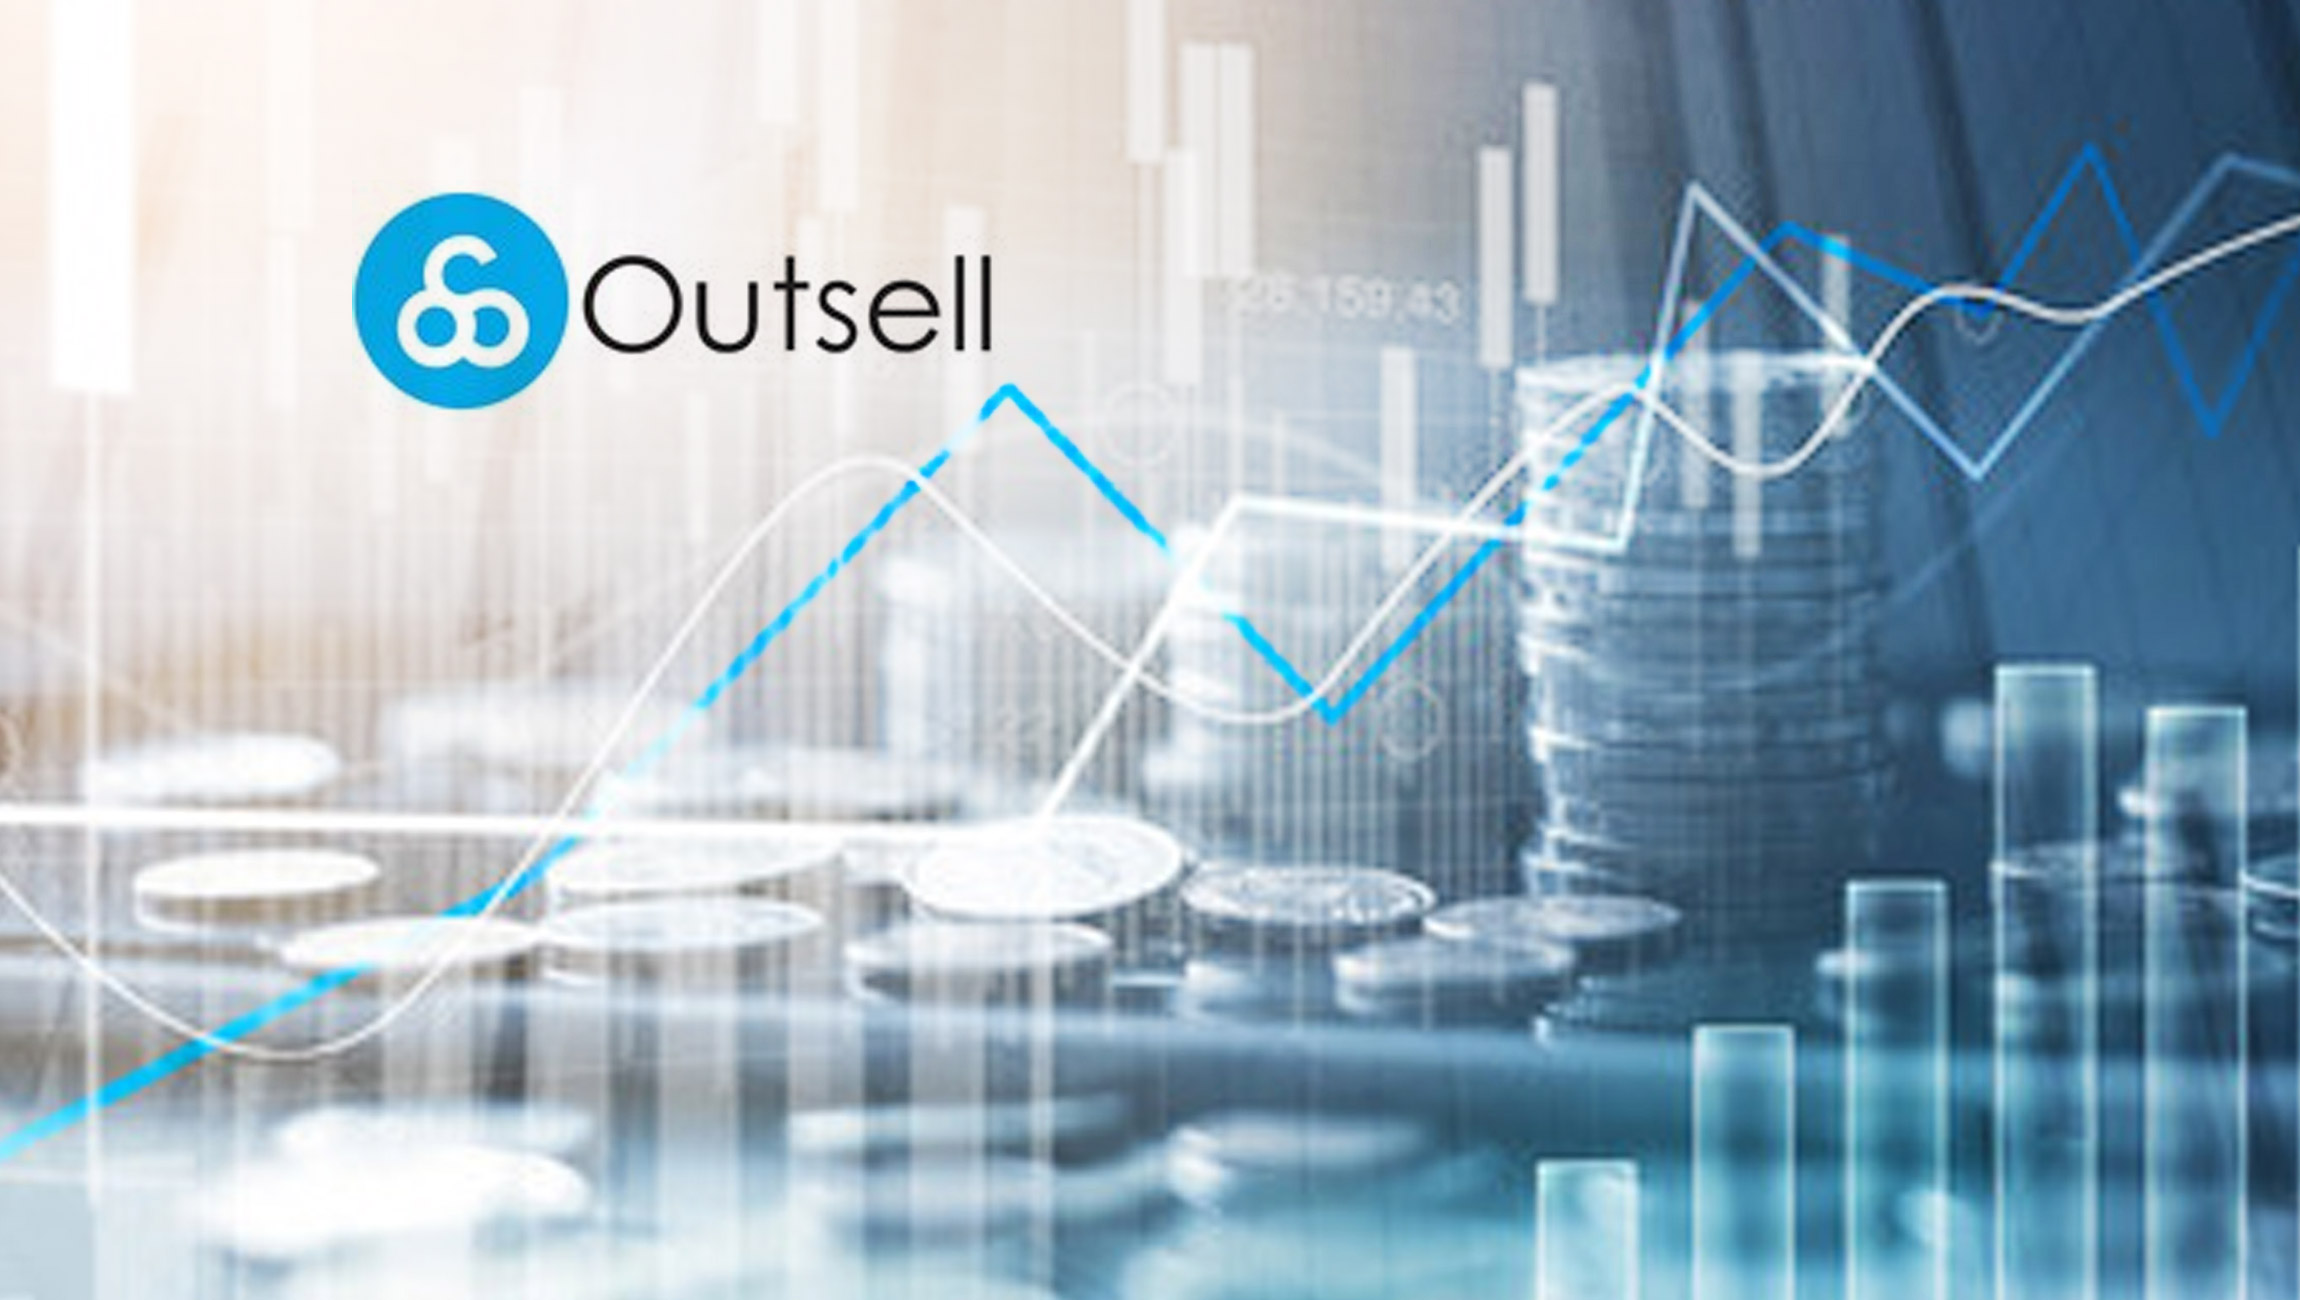 Outsell Reports Strong Revenue Growth in 2021, Is Positioned for Continued Velocity in 2022